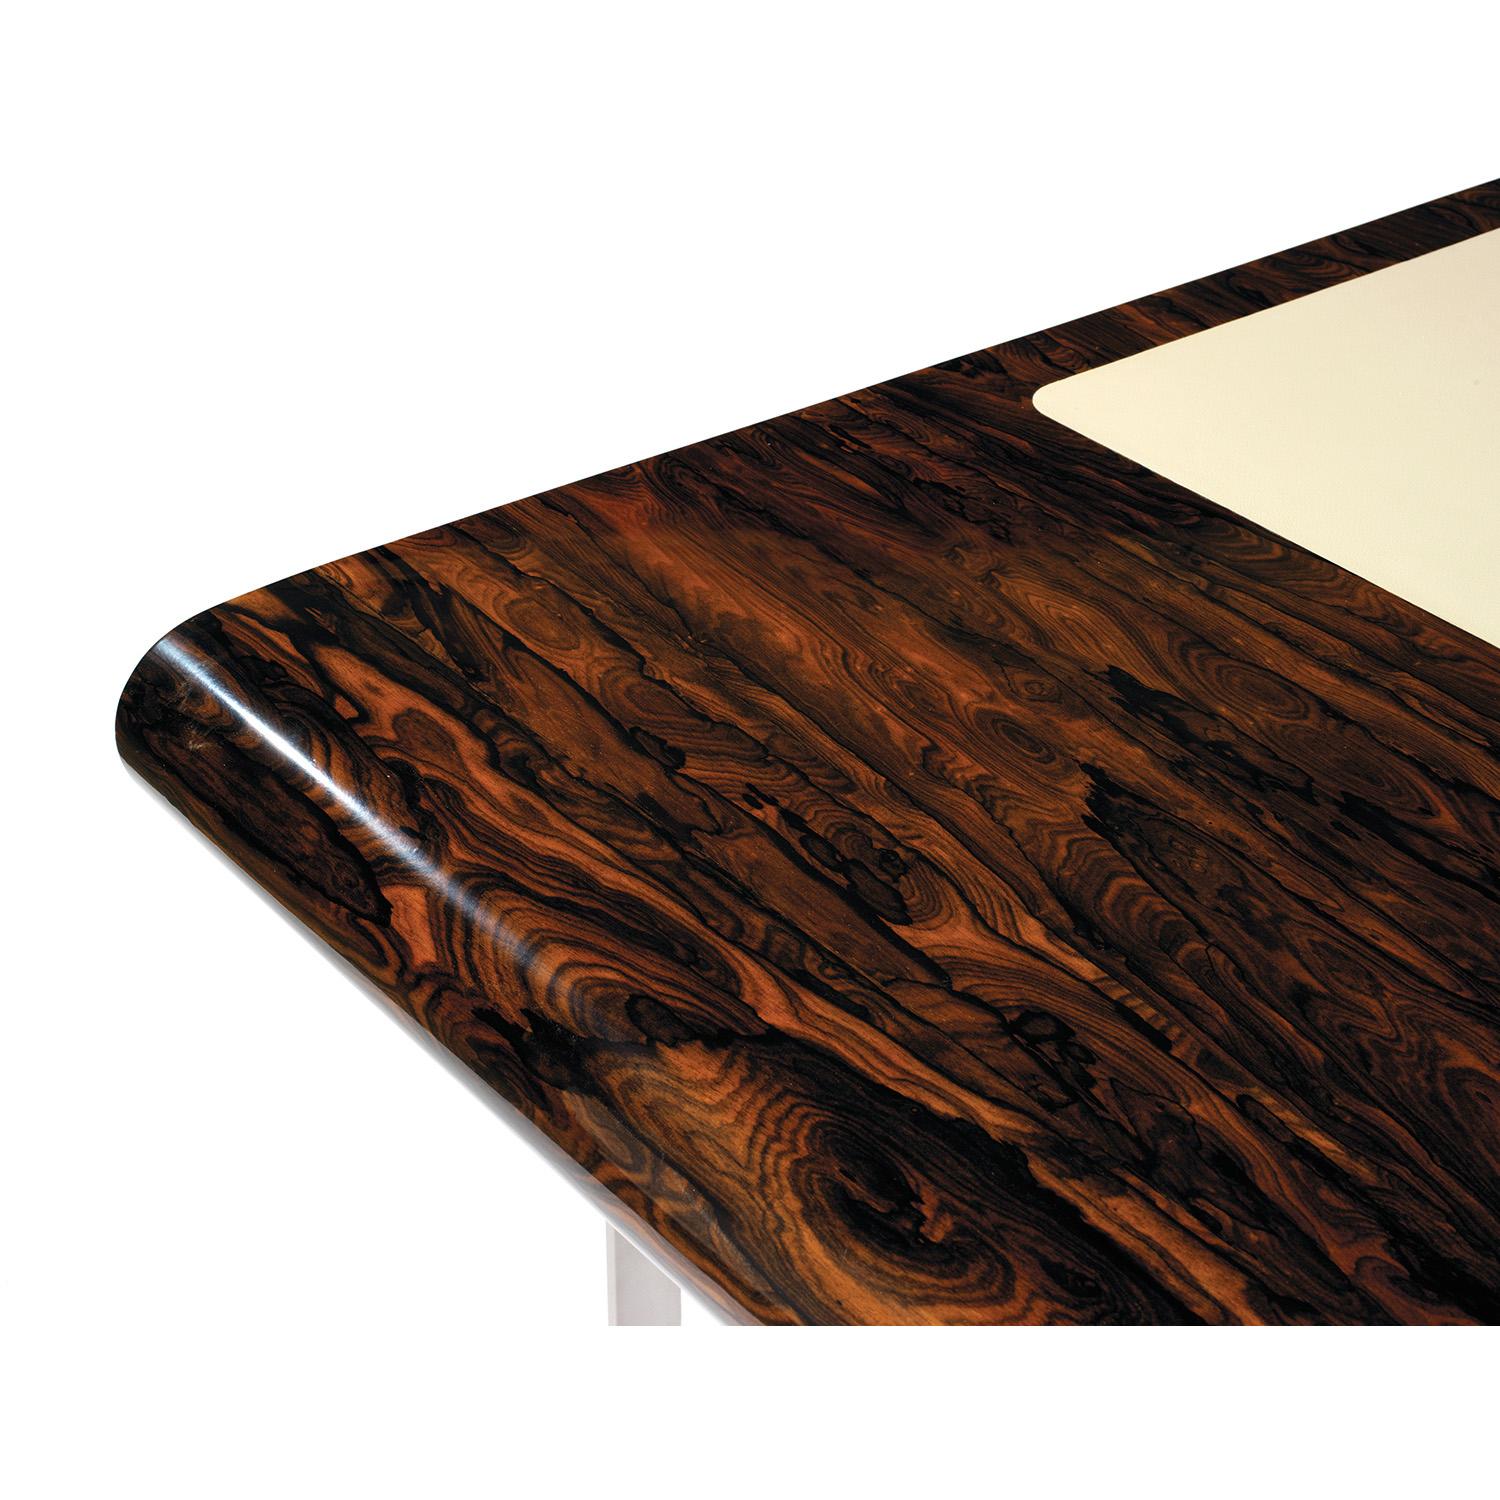 Modern Shanghai Desk in Ziricotte Wood, Leather Top and Silver Patined Leg For Sale